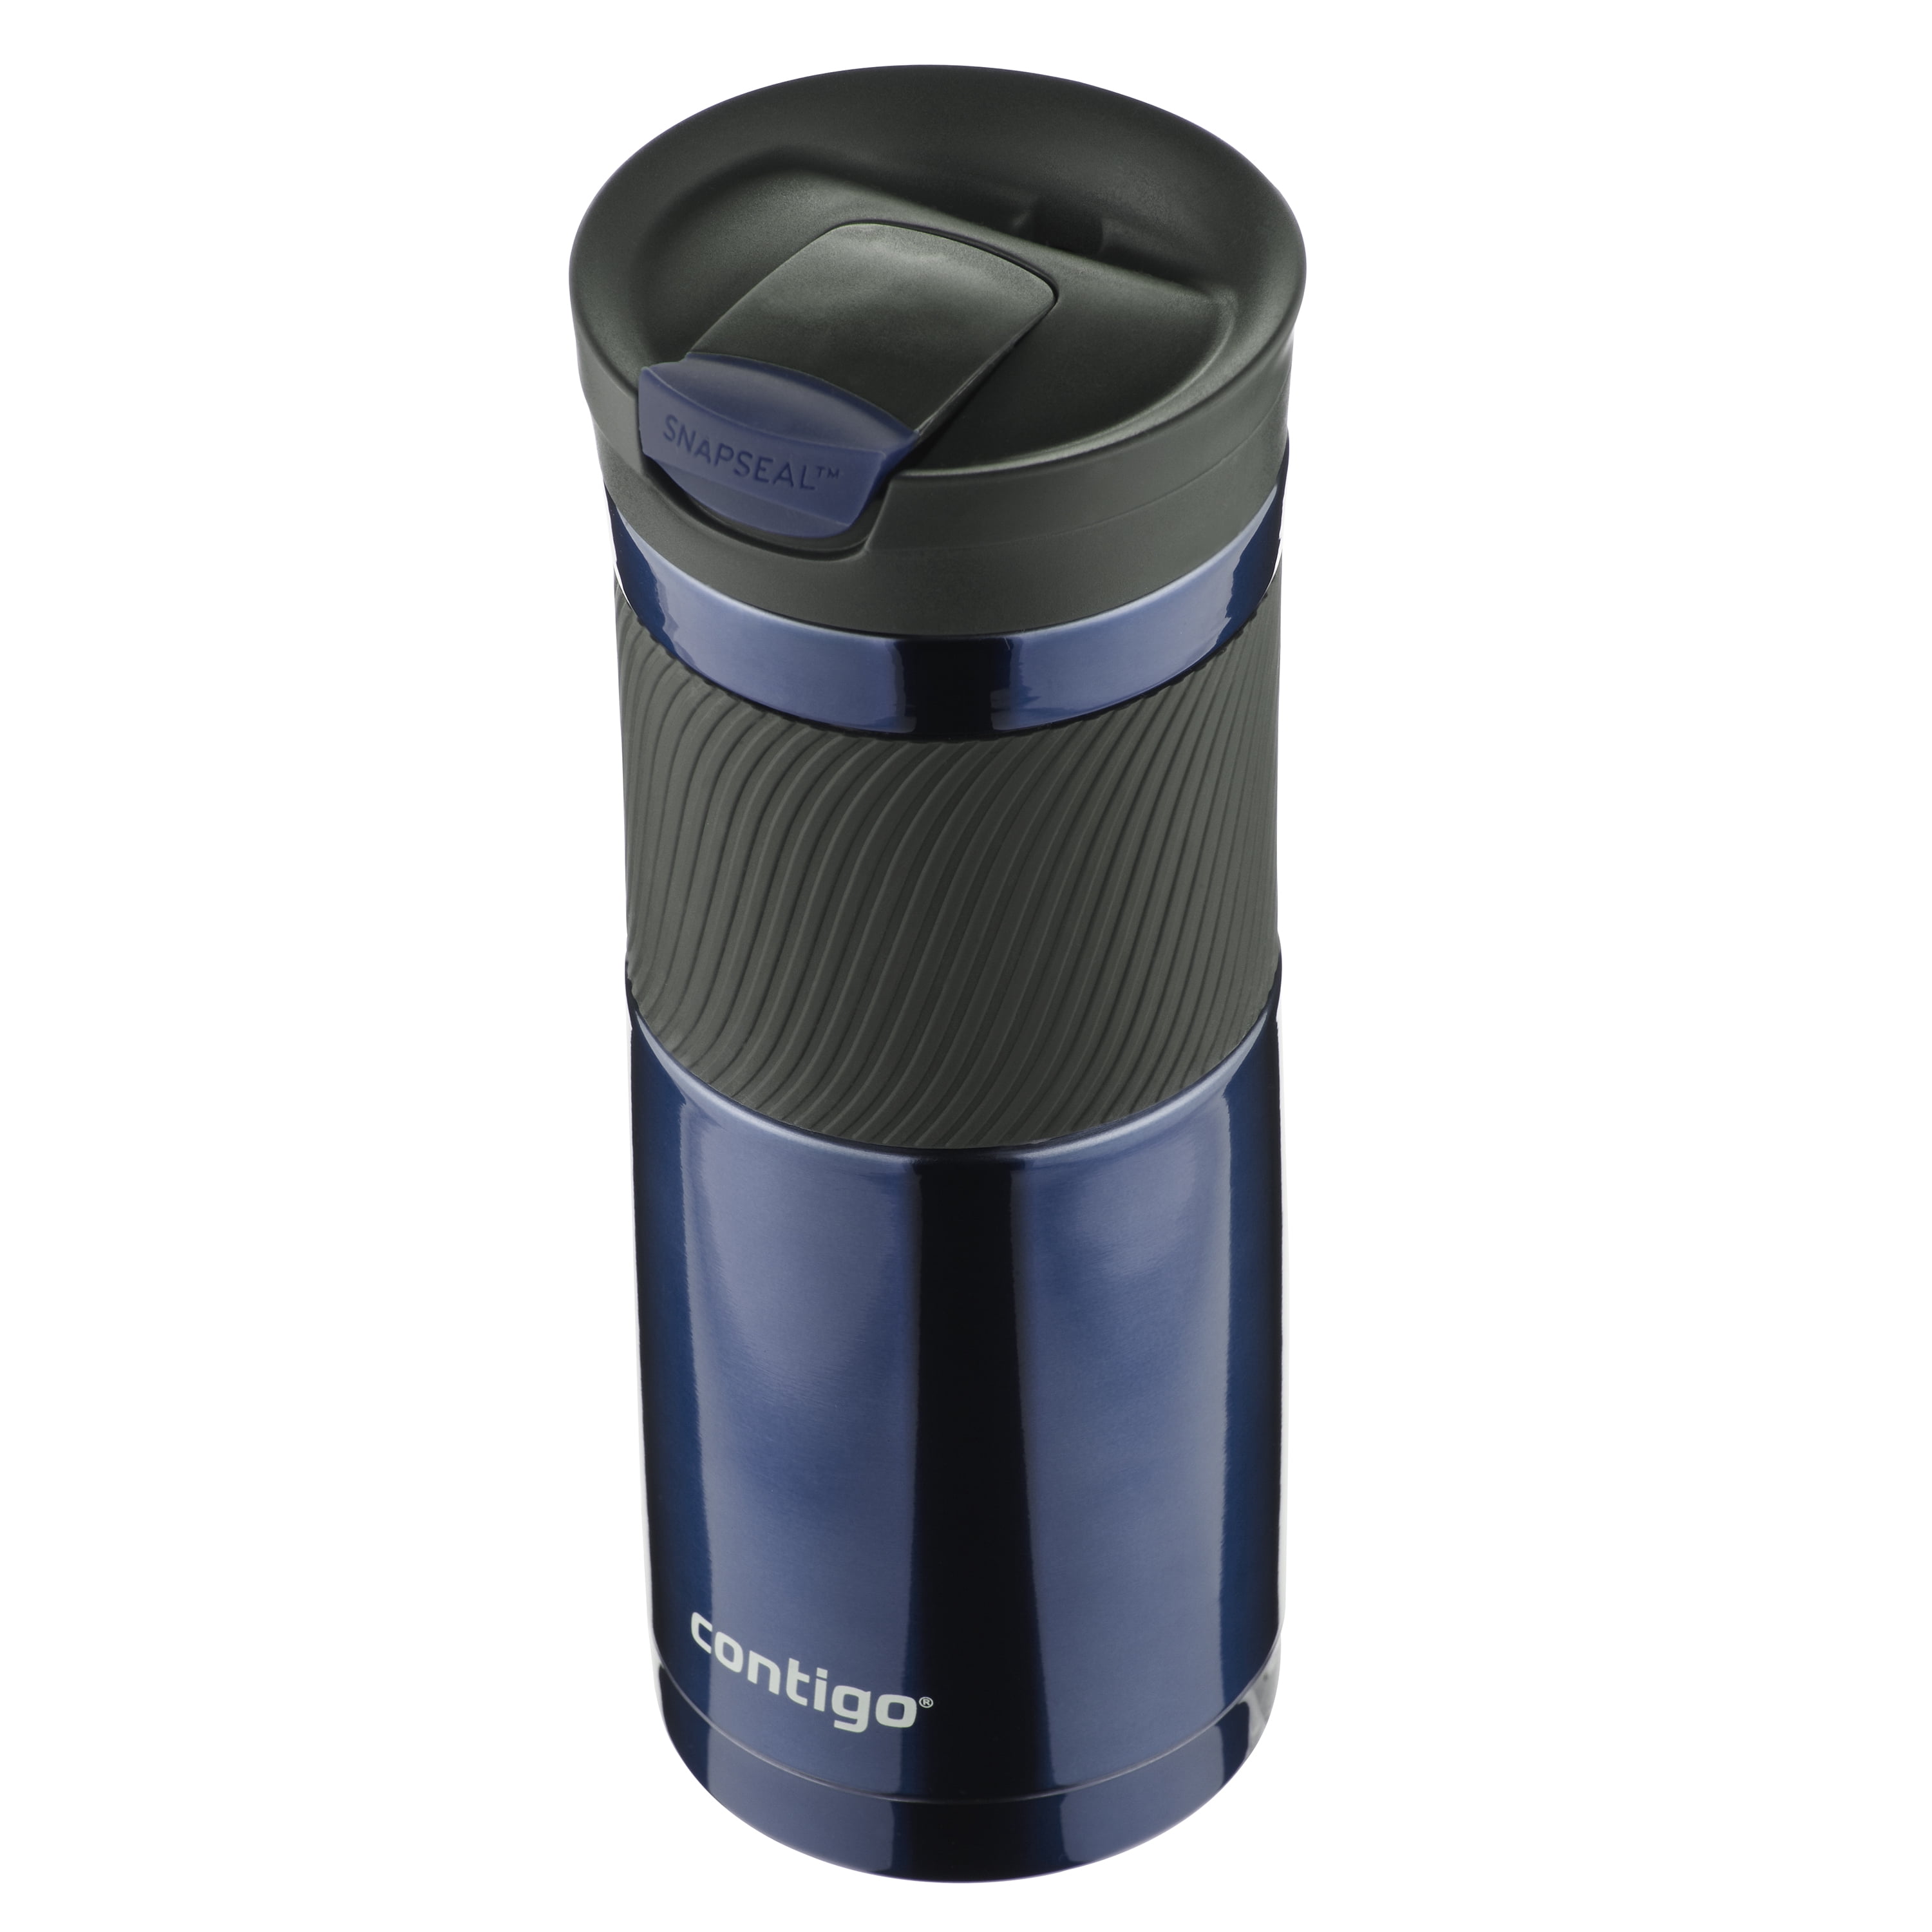 Contigo Byron Thermos Mug Cup Stainless Steel 470 Cold And Hot Drink Holder  Snapseal Vacuum Flask One Hand Lift Inner Gray Blue Red Black Navy Pink  2023 Unisex Kitchen Camping 6-12 Hours Protection